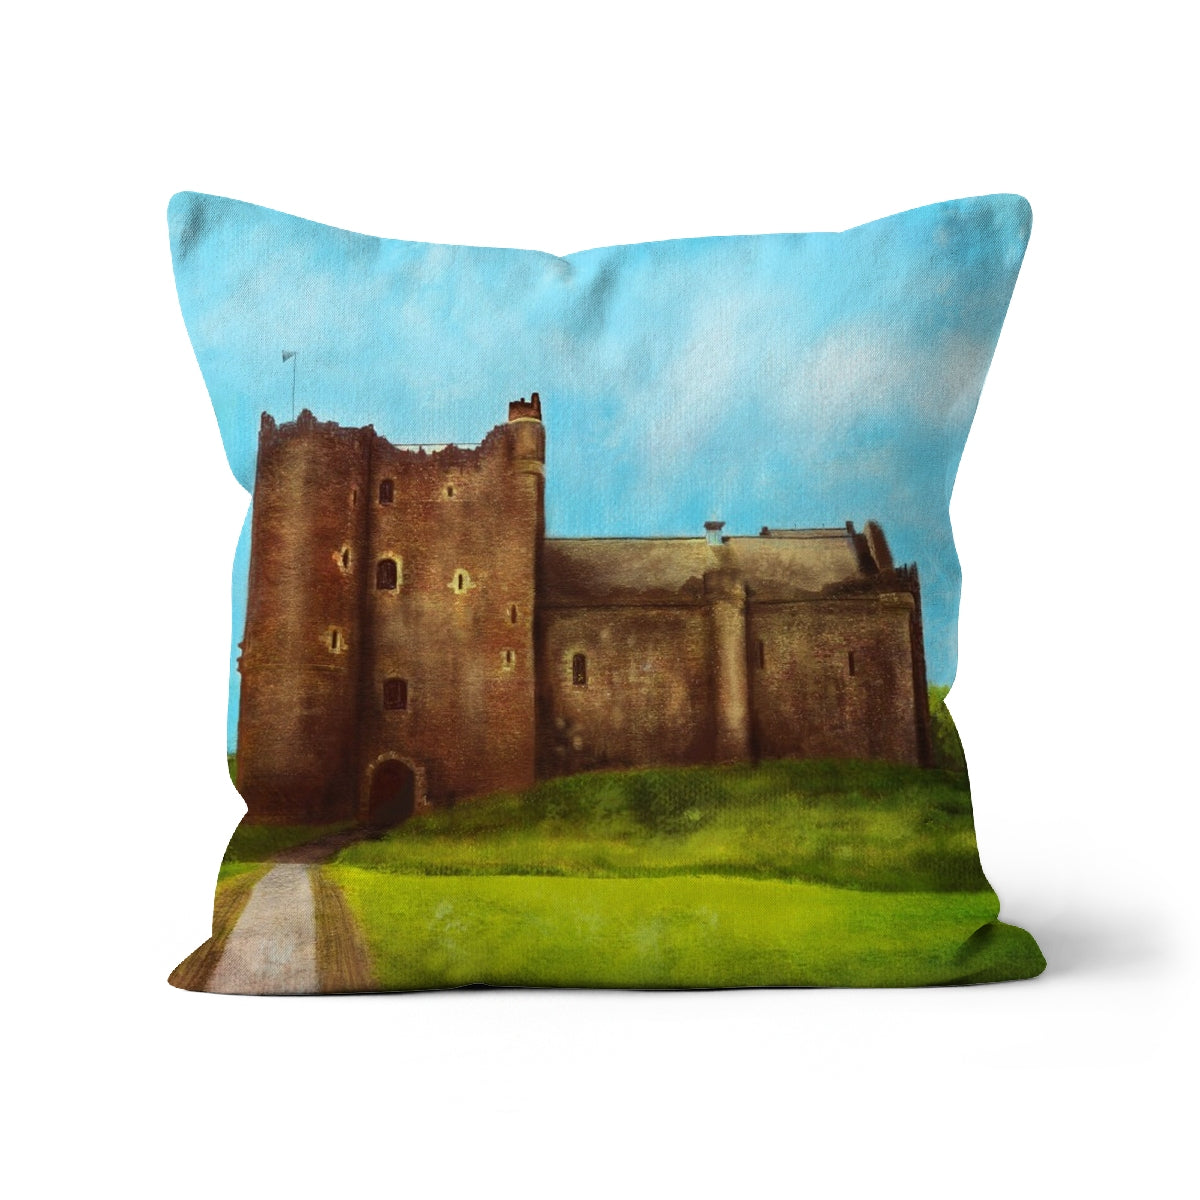 Doune Castle Art Gifts Cushion-Cushions-Historic & Iconic Scotland Art Gallery-Linen-12"x12"-Paintings, Prints, Homeware, Art Gifts From Scotland By Scottish Artist Kevin Hunter